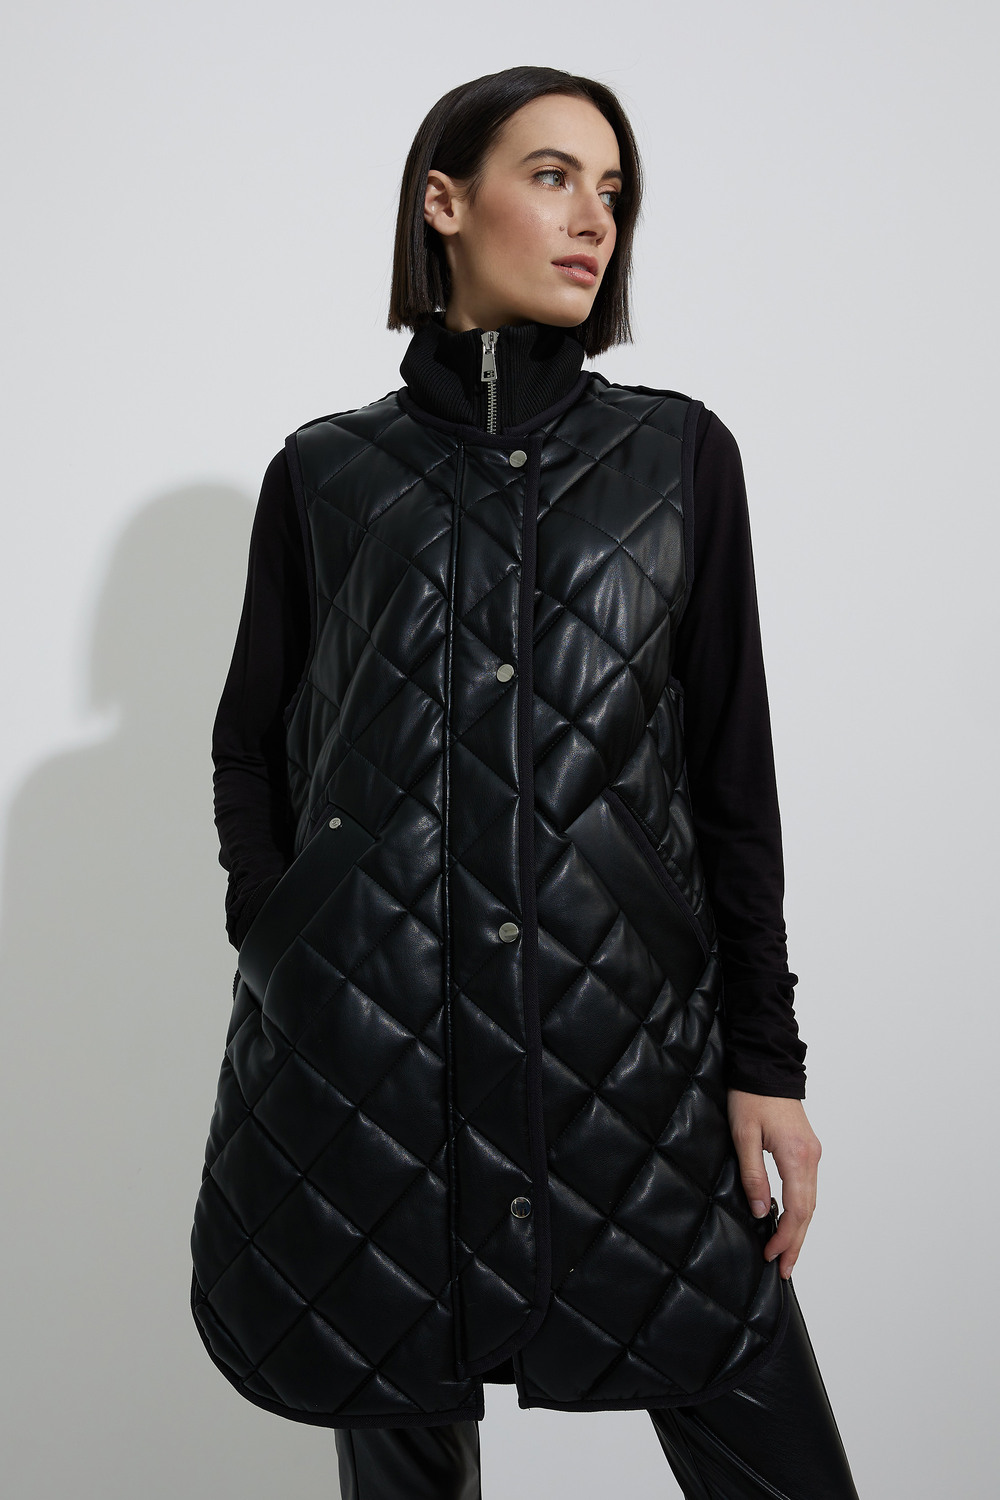 Quilted Faux Leather Sleeveless Coat Style 8425. Black